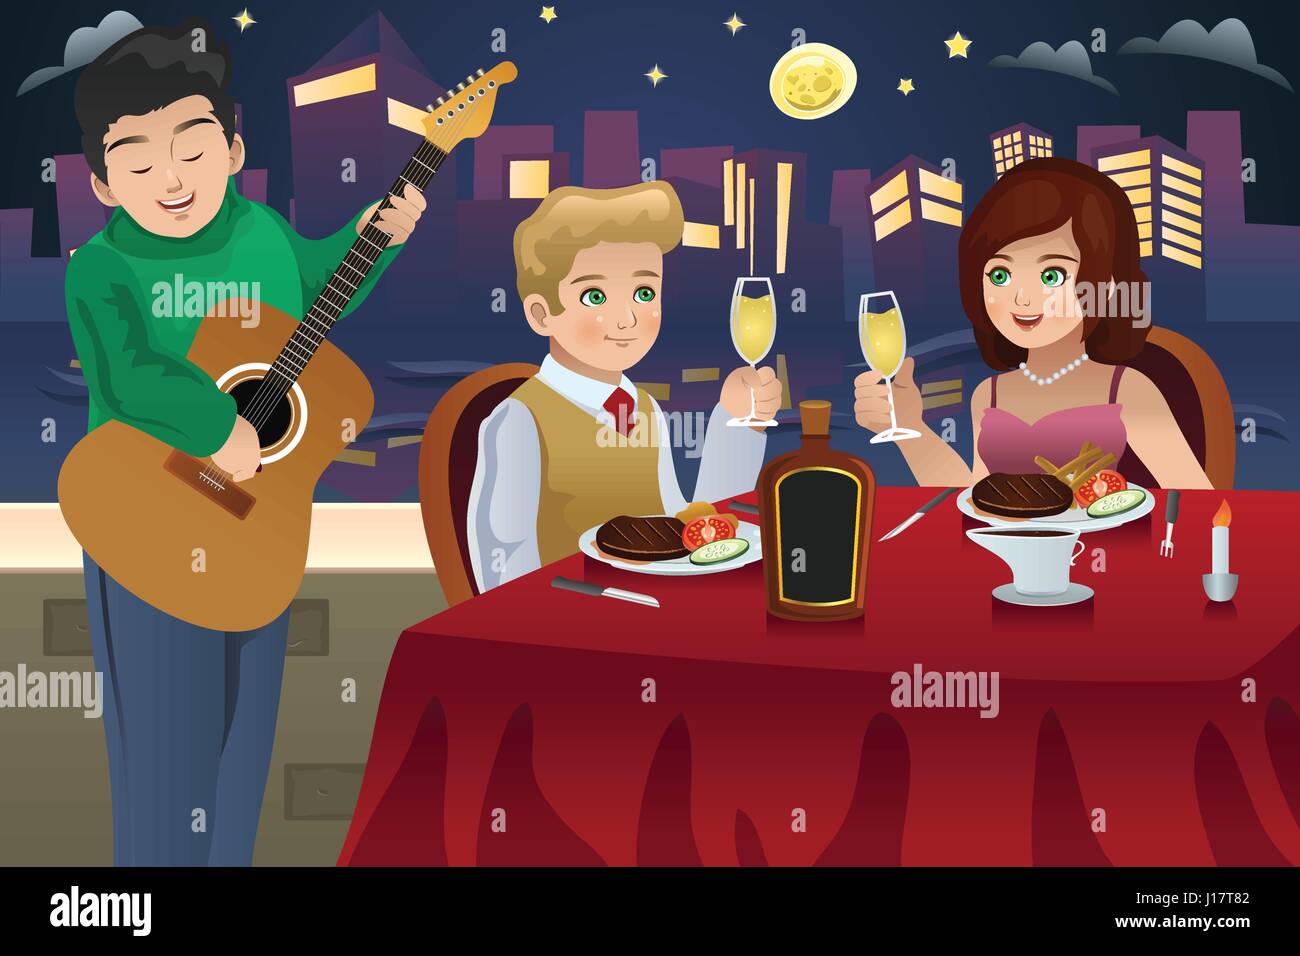 A vector illustration of happy couple having romantic dinner together Stock Vector